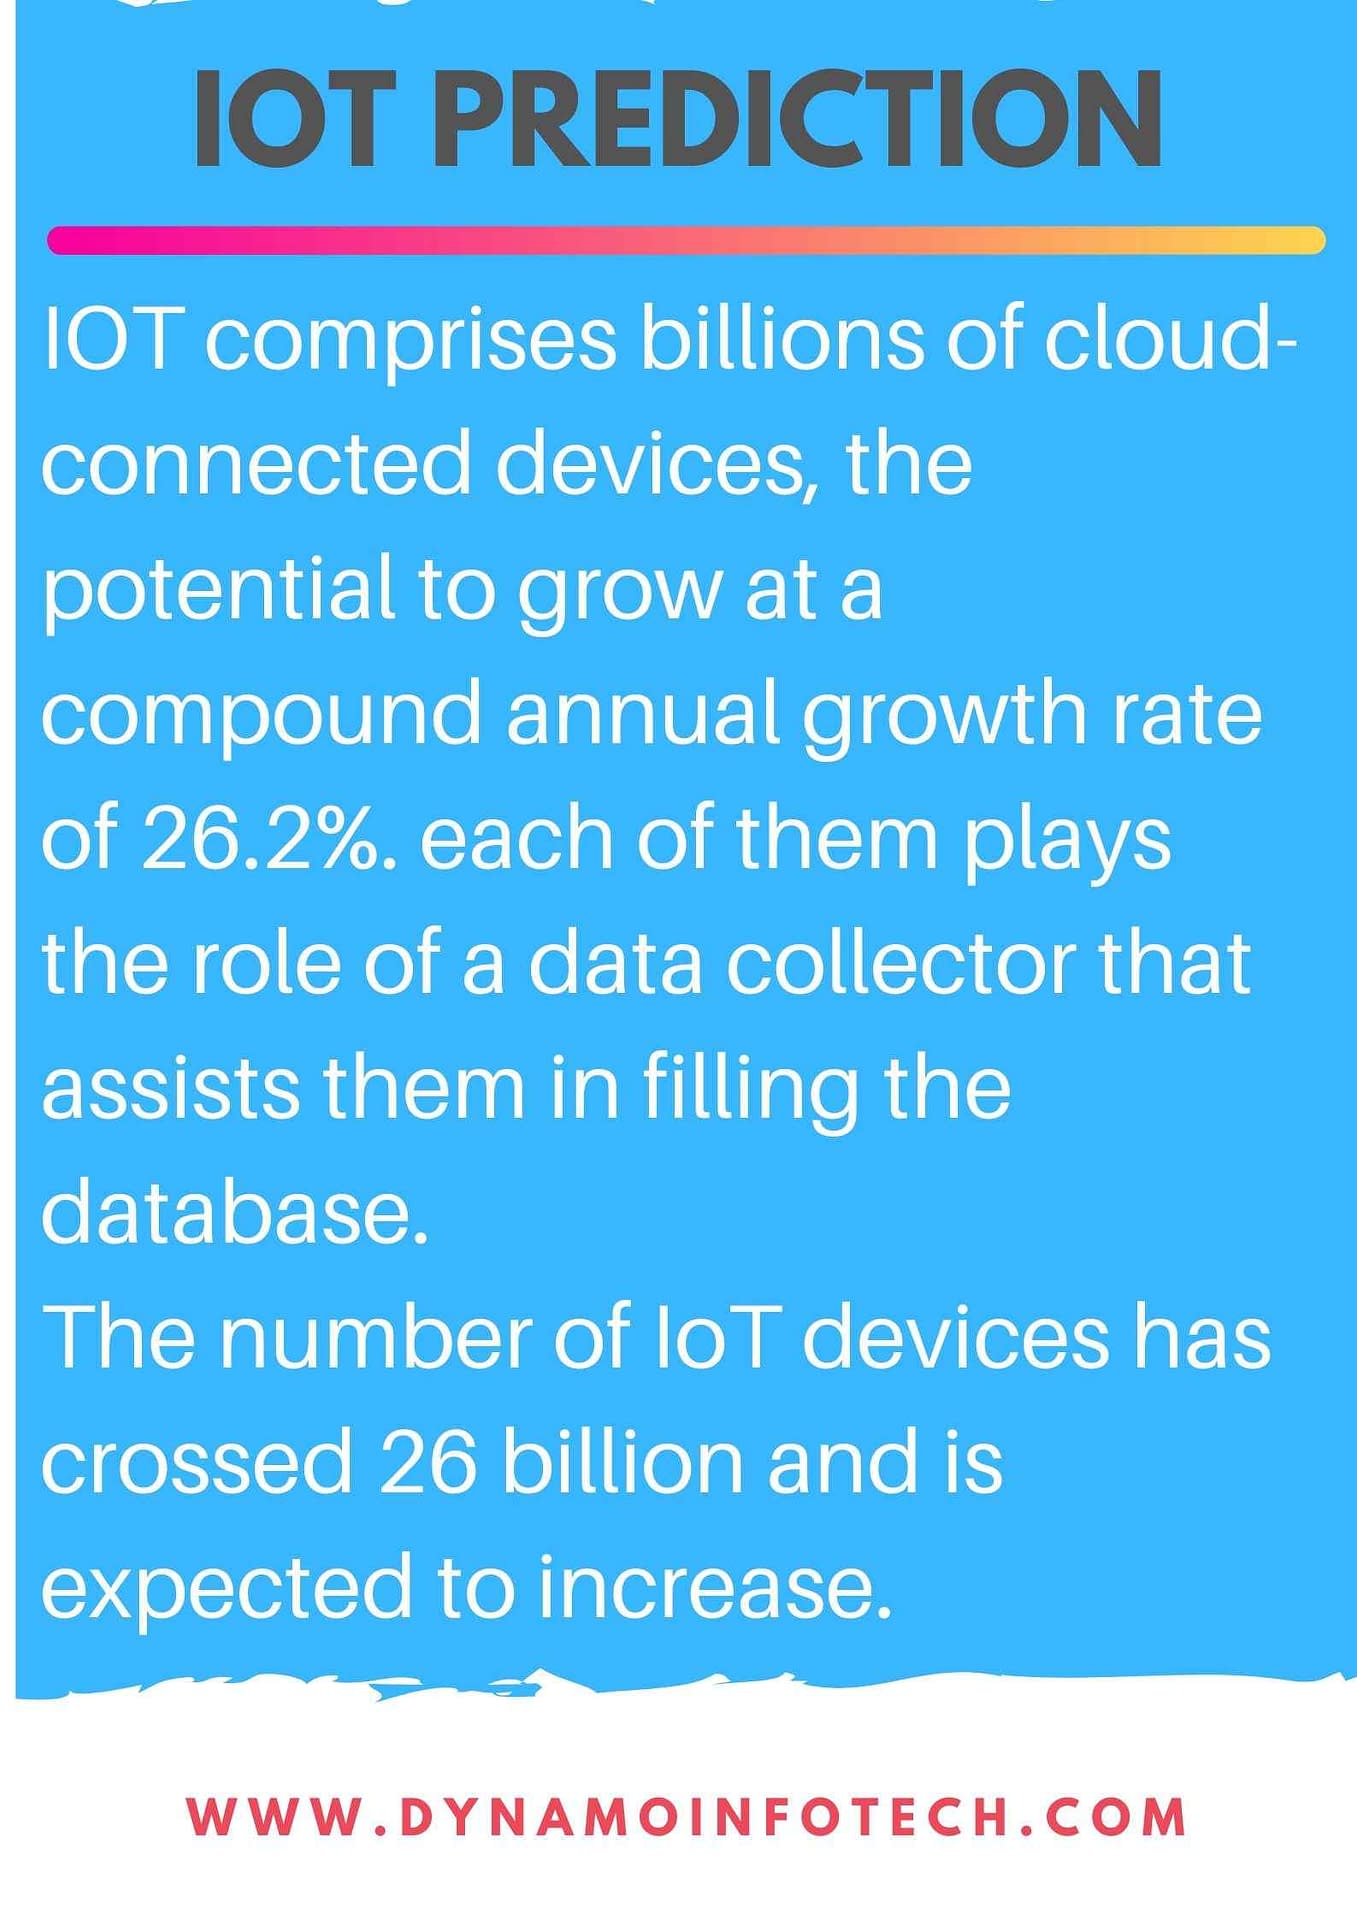 Iot technological prediction for the year 2020